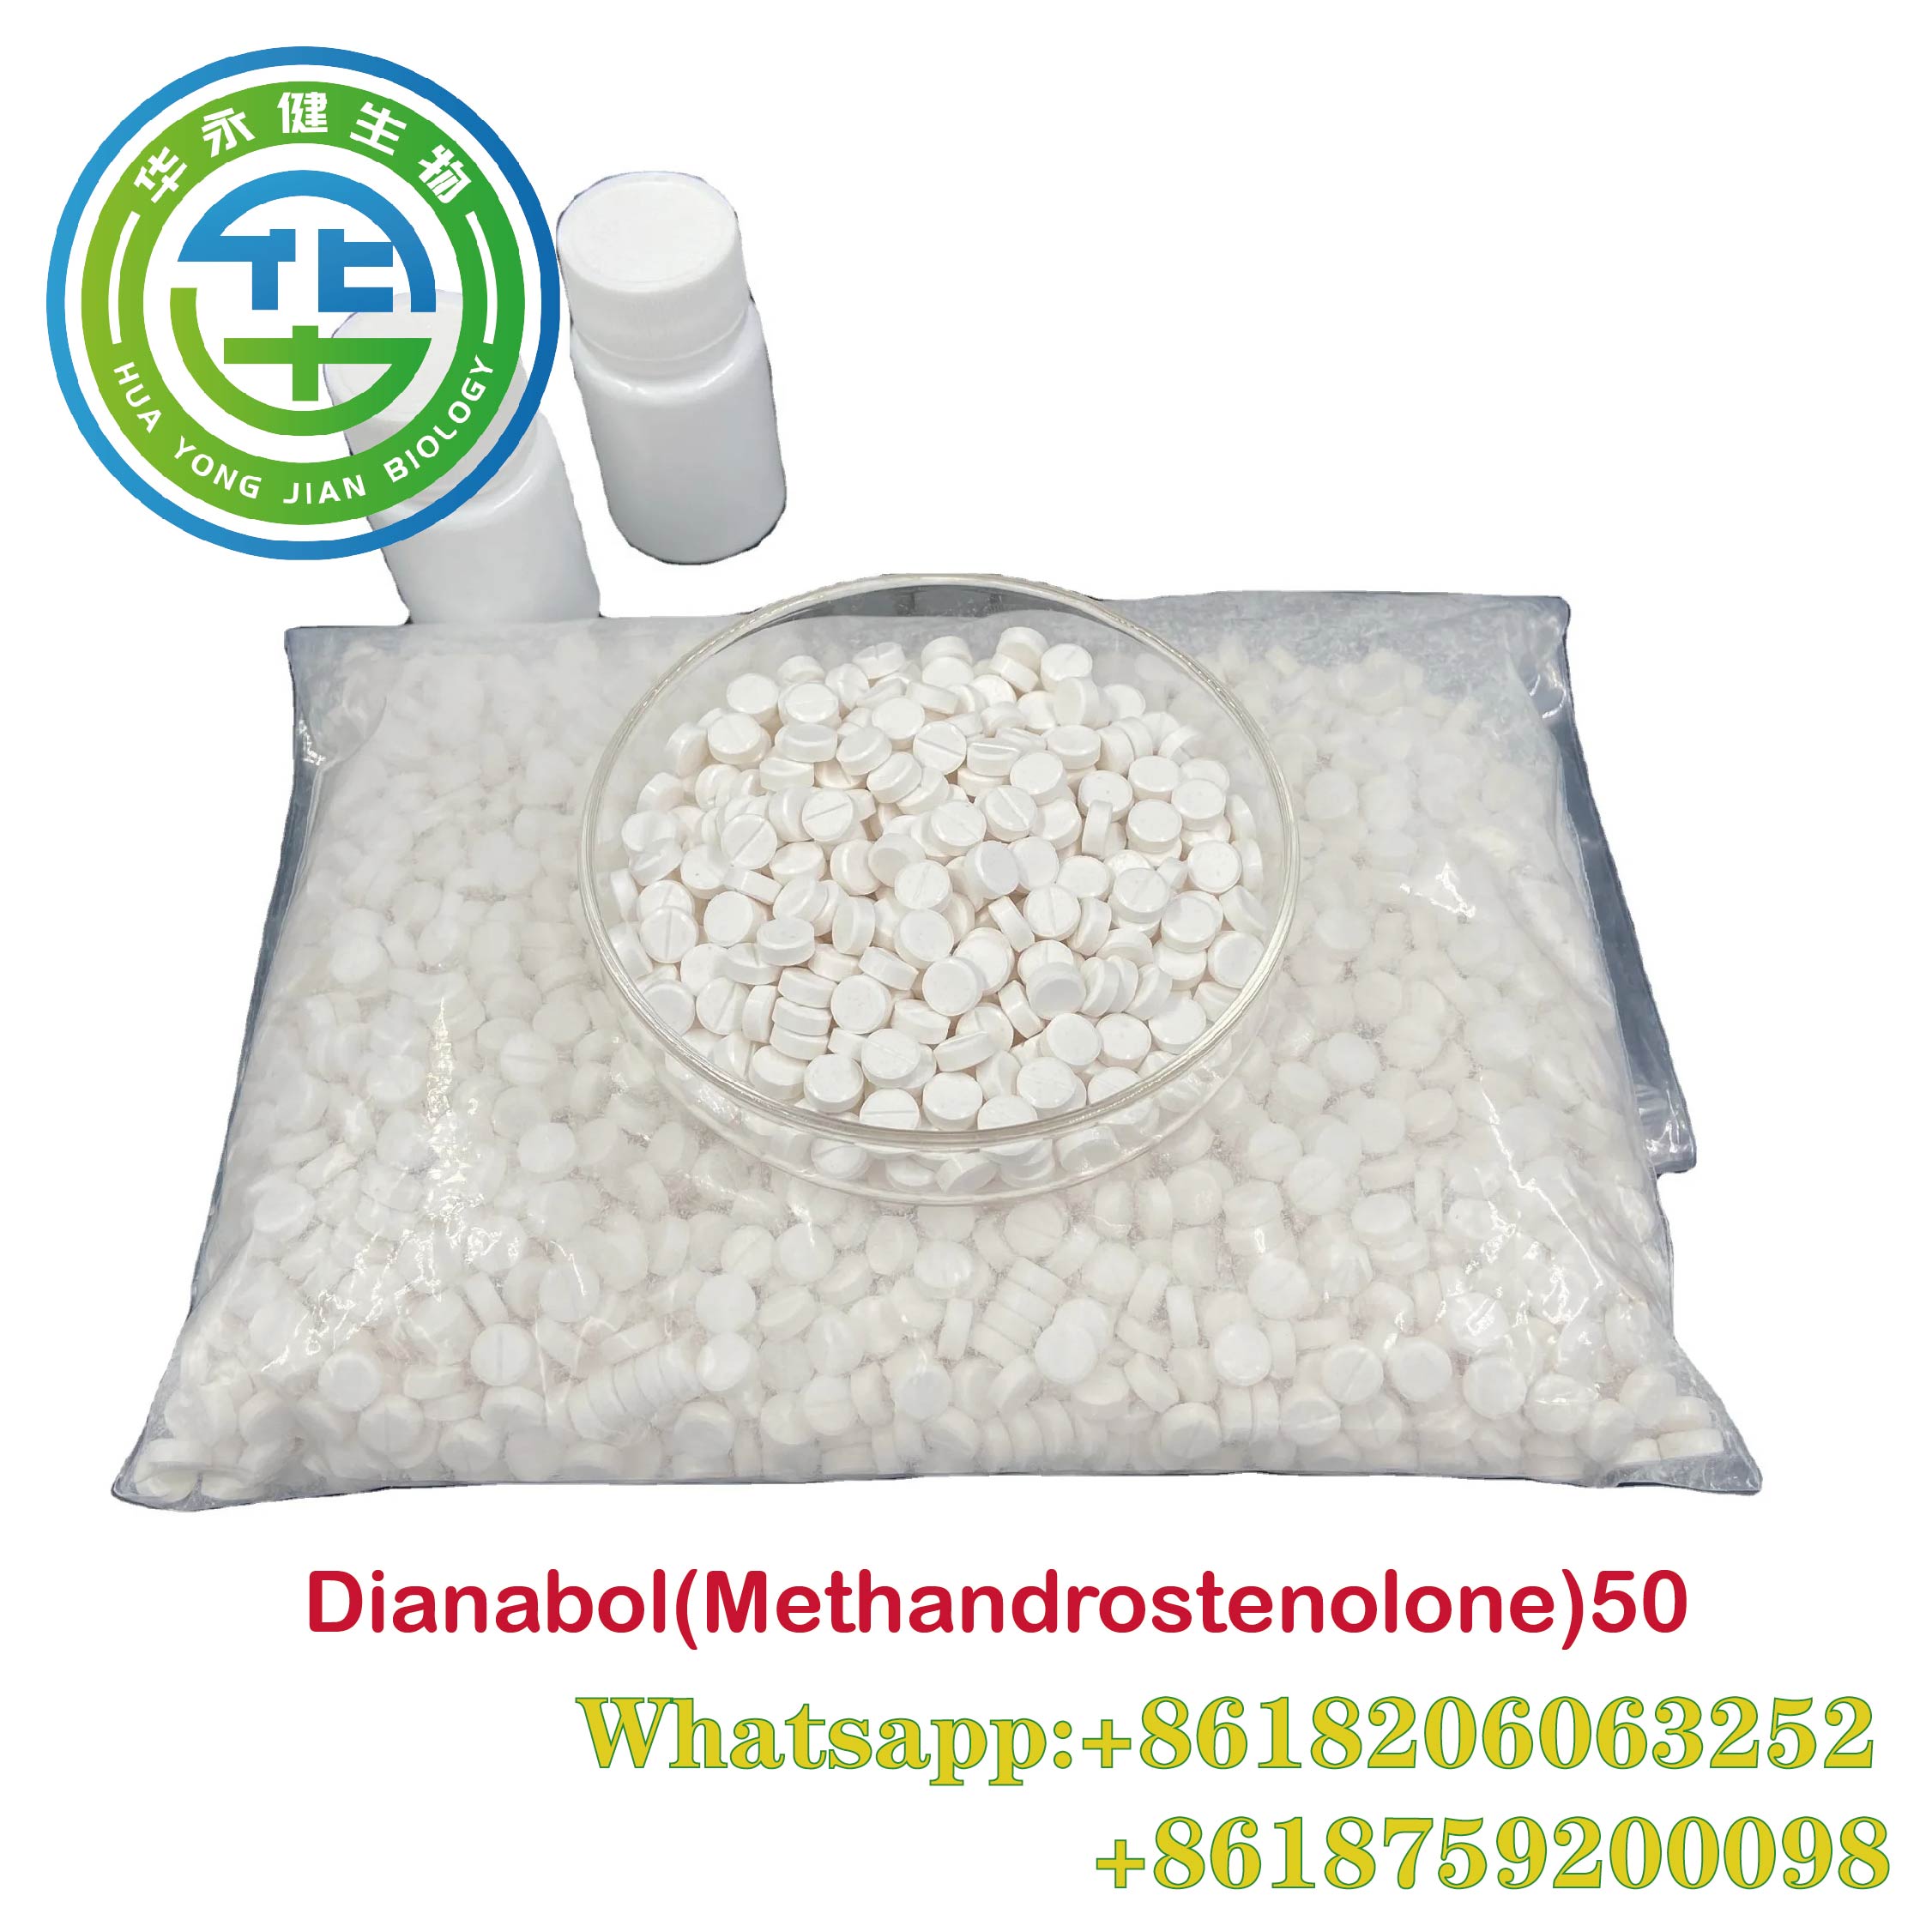  Dianabol Tablets 50mg*100 /bottle Tablets Legal Anabolic Steroids Metandienone 50 for Big Muscle